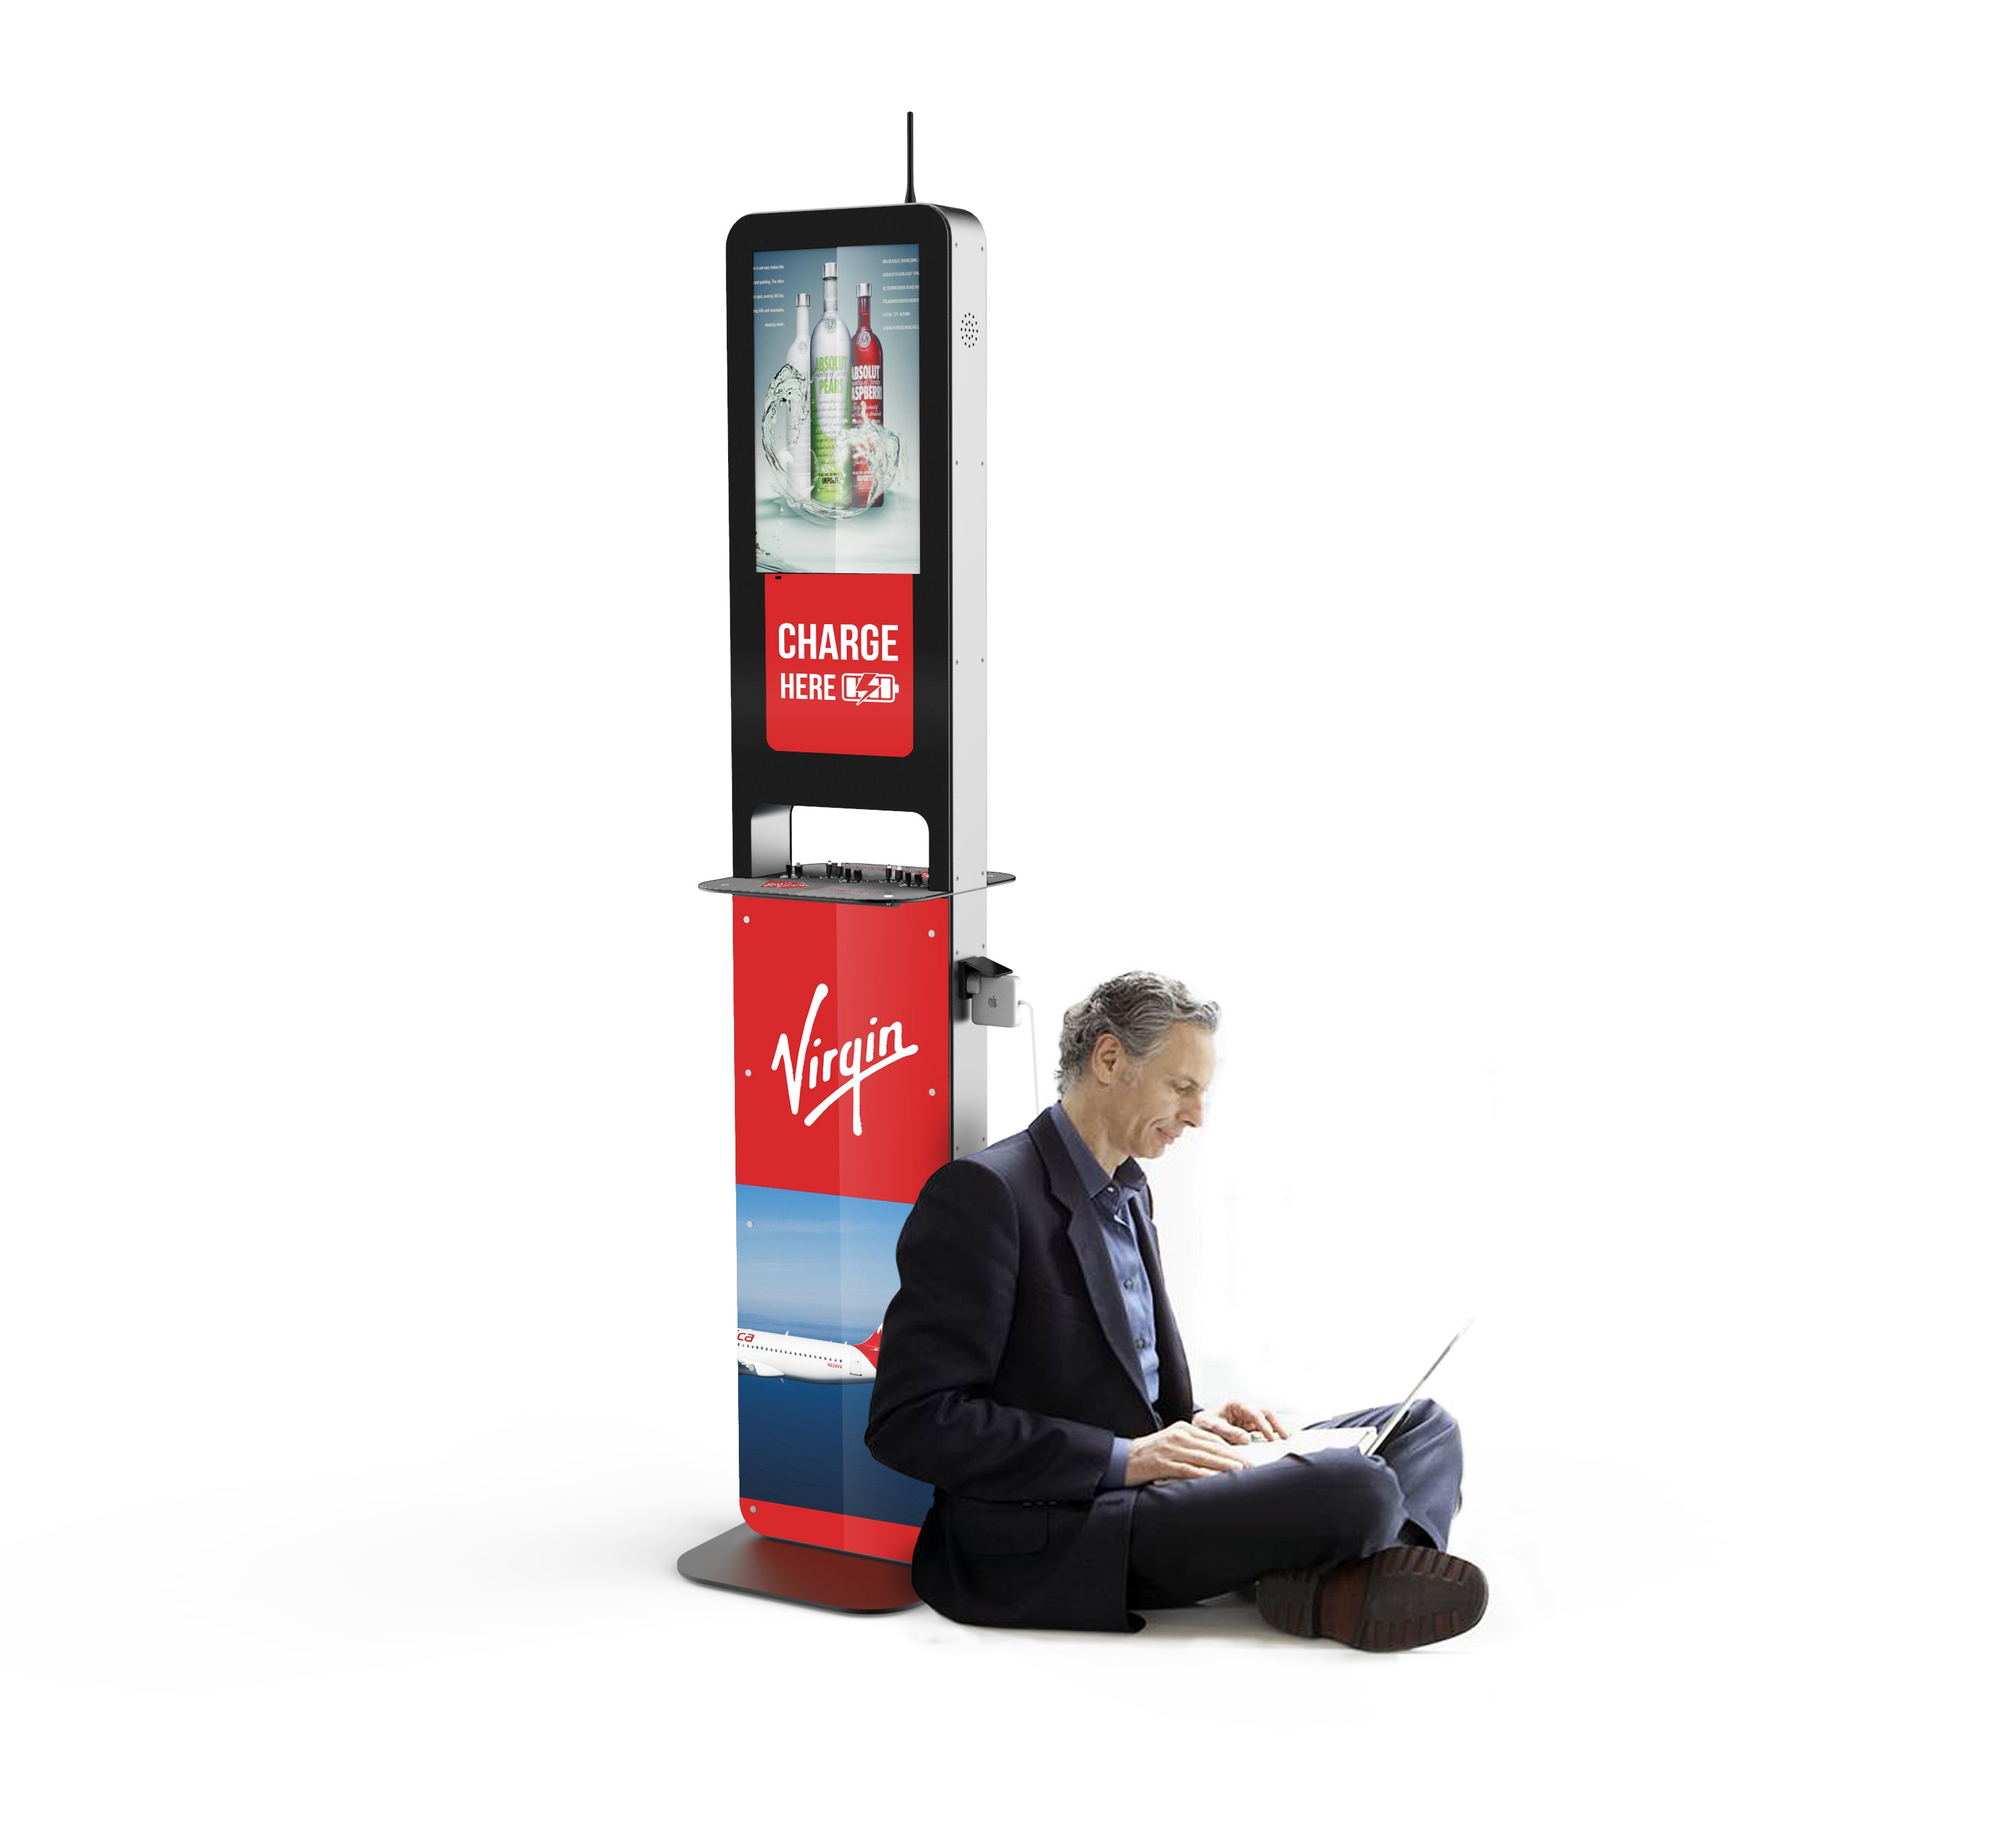 A man sits on the ground against the Aidan Charging Kiosk. His laptop's charger is plugged into the charging station behind him. Advertisements for liquor and Virgin Airlines are displayed on the screen of the kiosk. A sign stating 